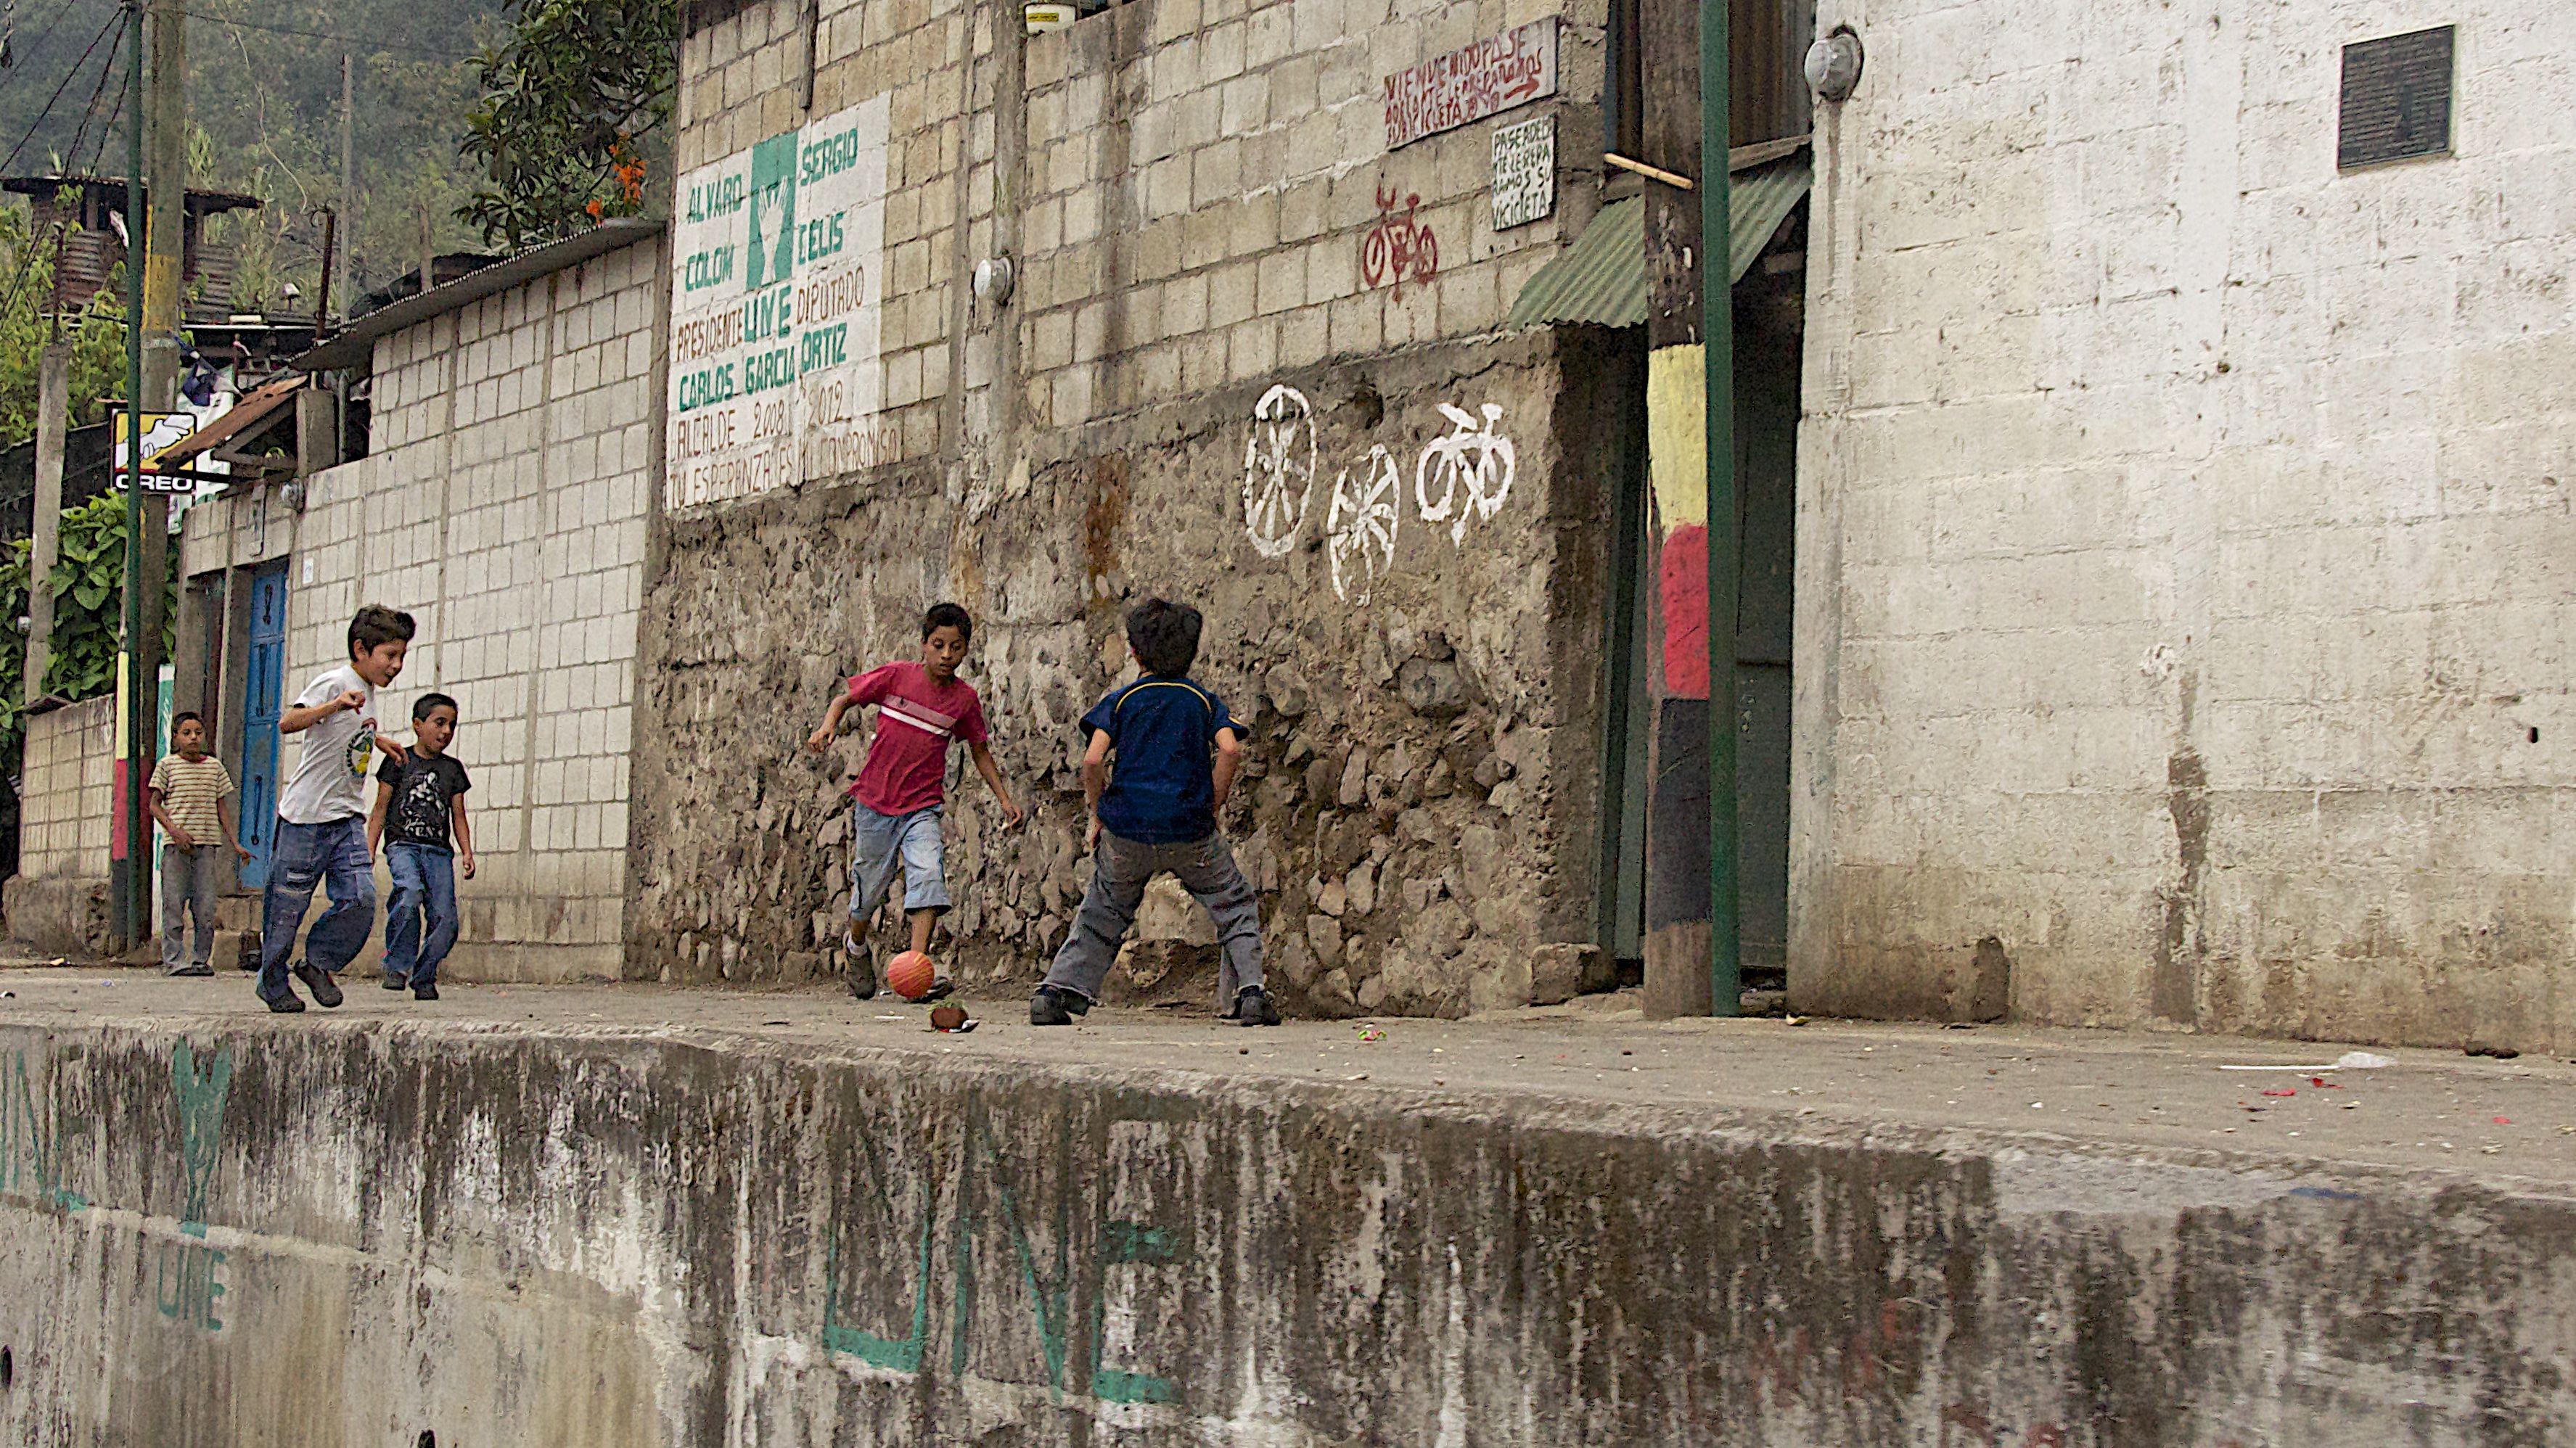 Wallpaper, city, street, wall, road, town, soccer, play, concrete